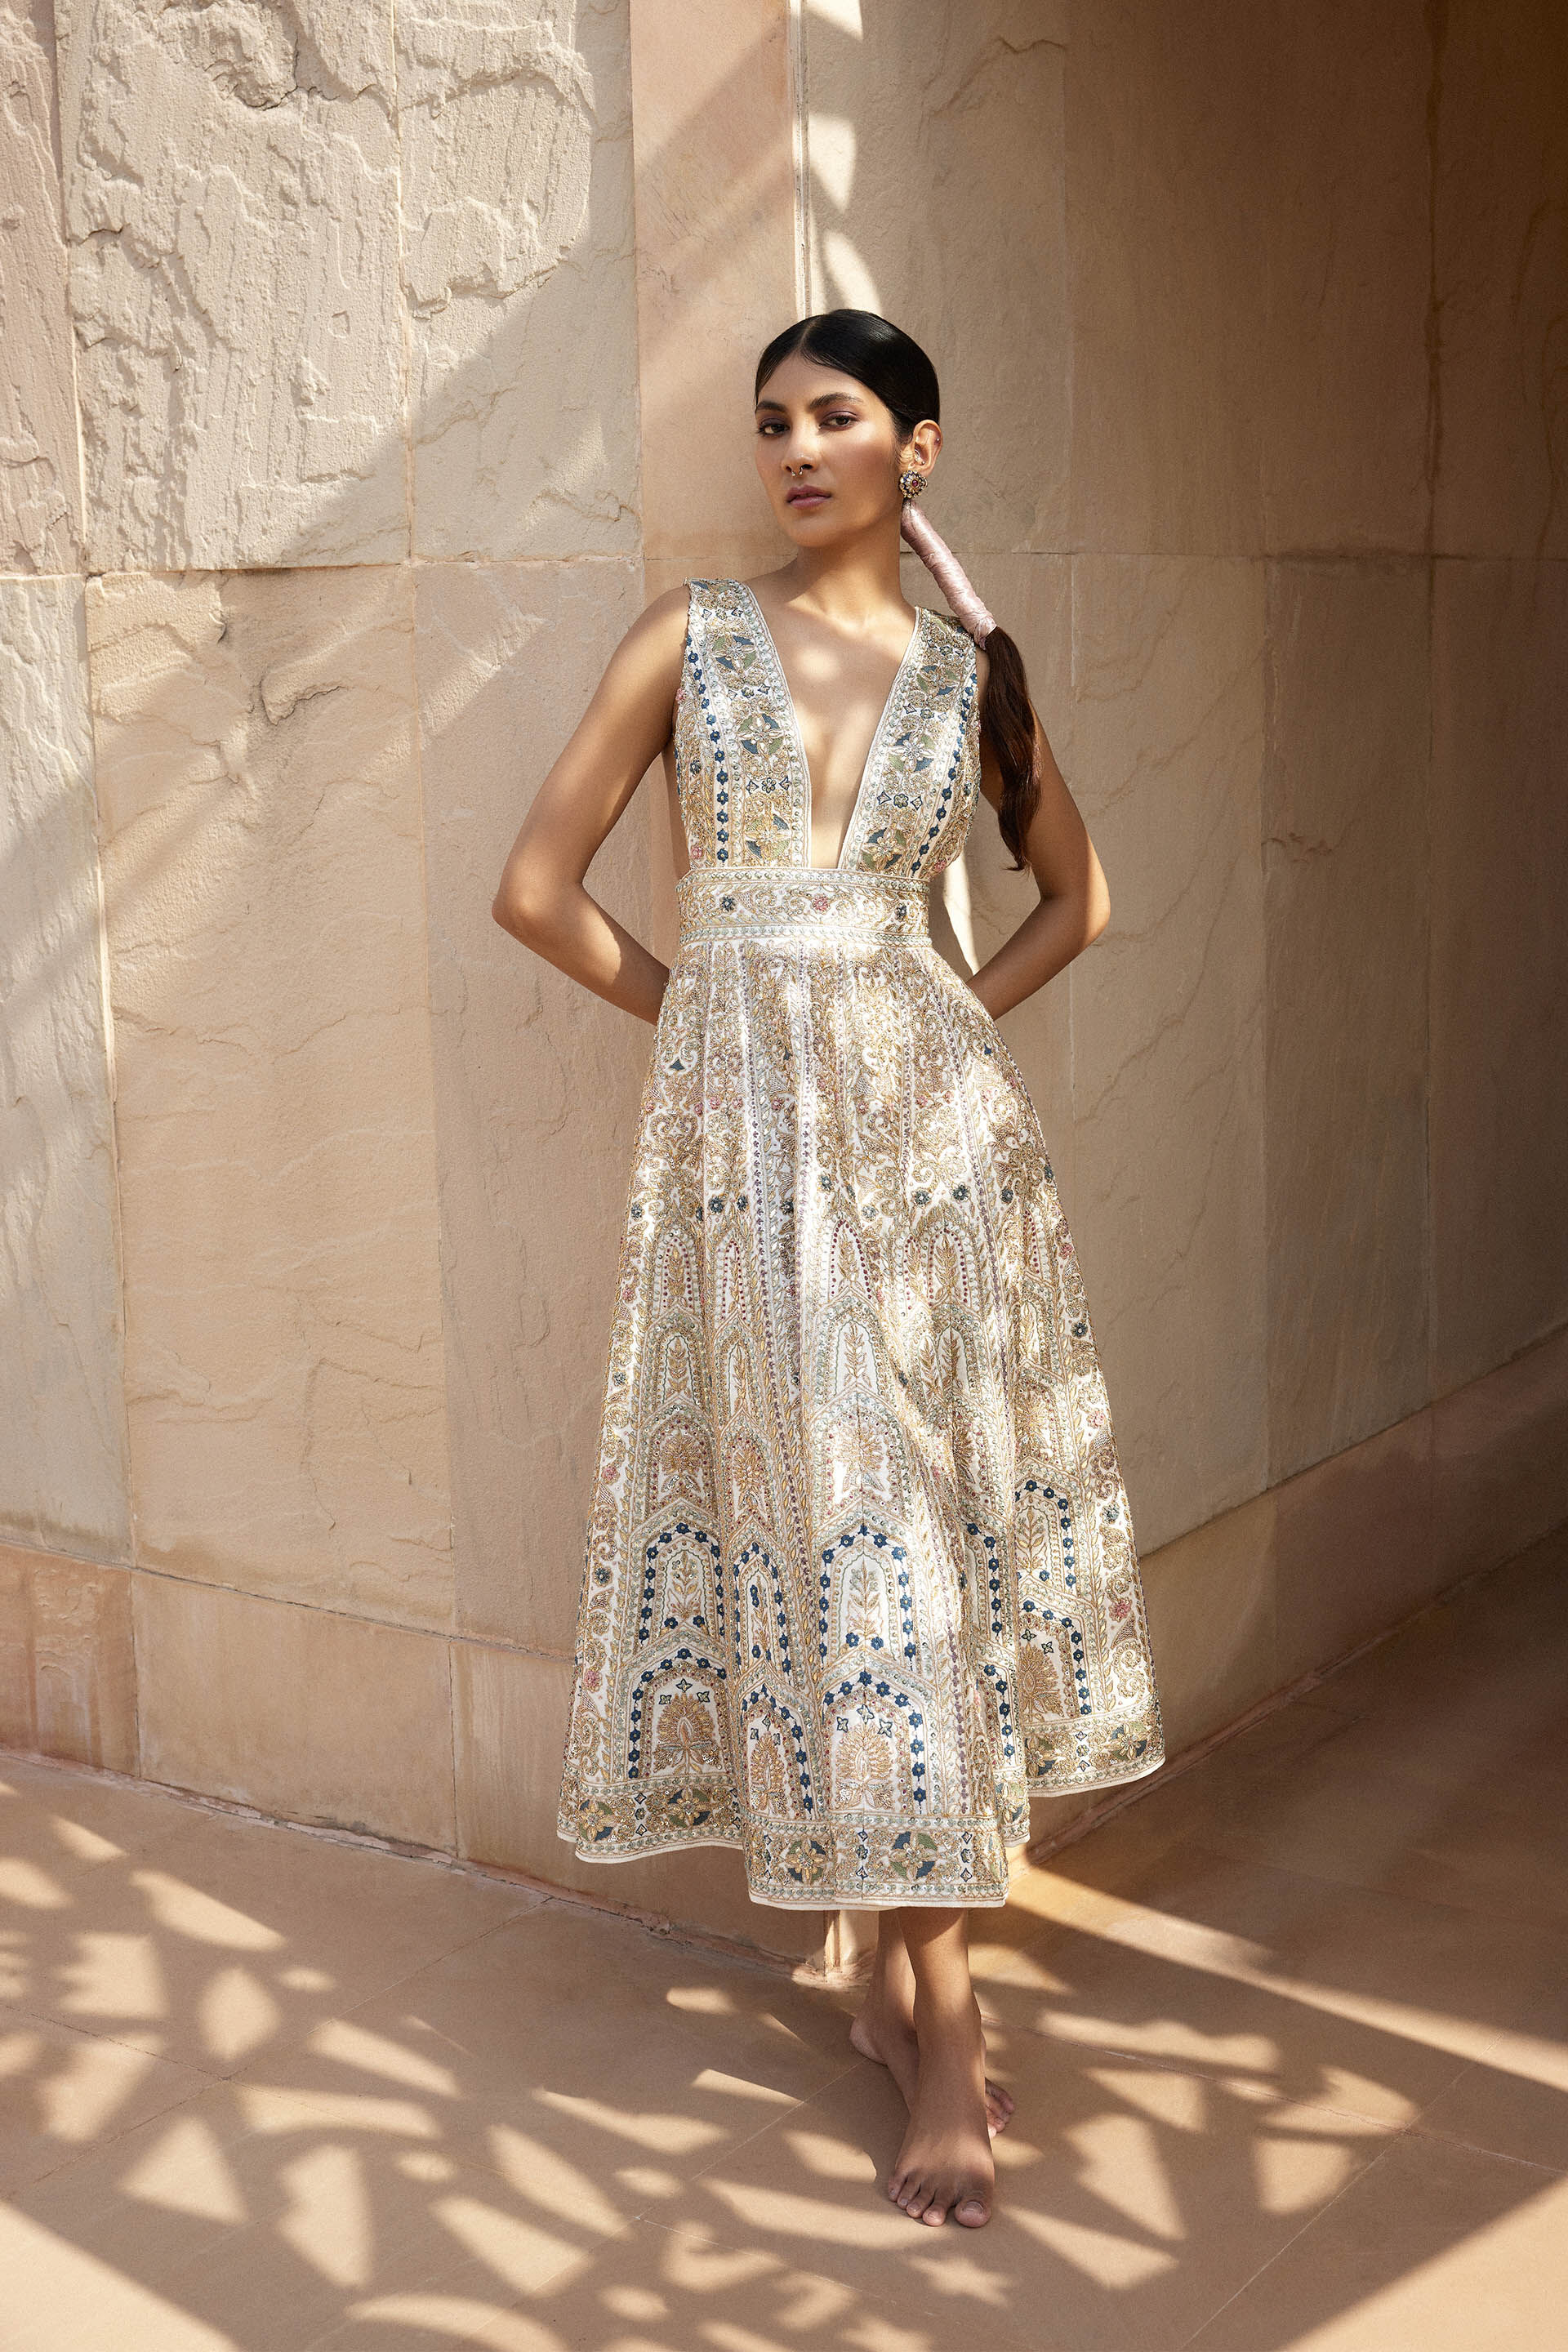 Beat The Heat With Anita Dongre's Latest Collection 'Summer in Santorini' |  Indian wedding outfits, Indian fashion dresses, Indian bridal dress